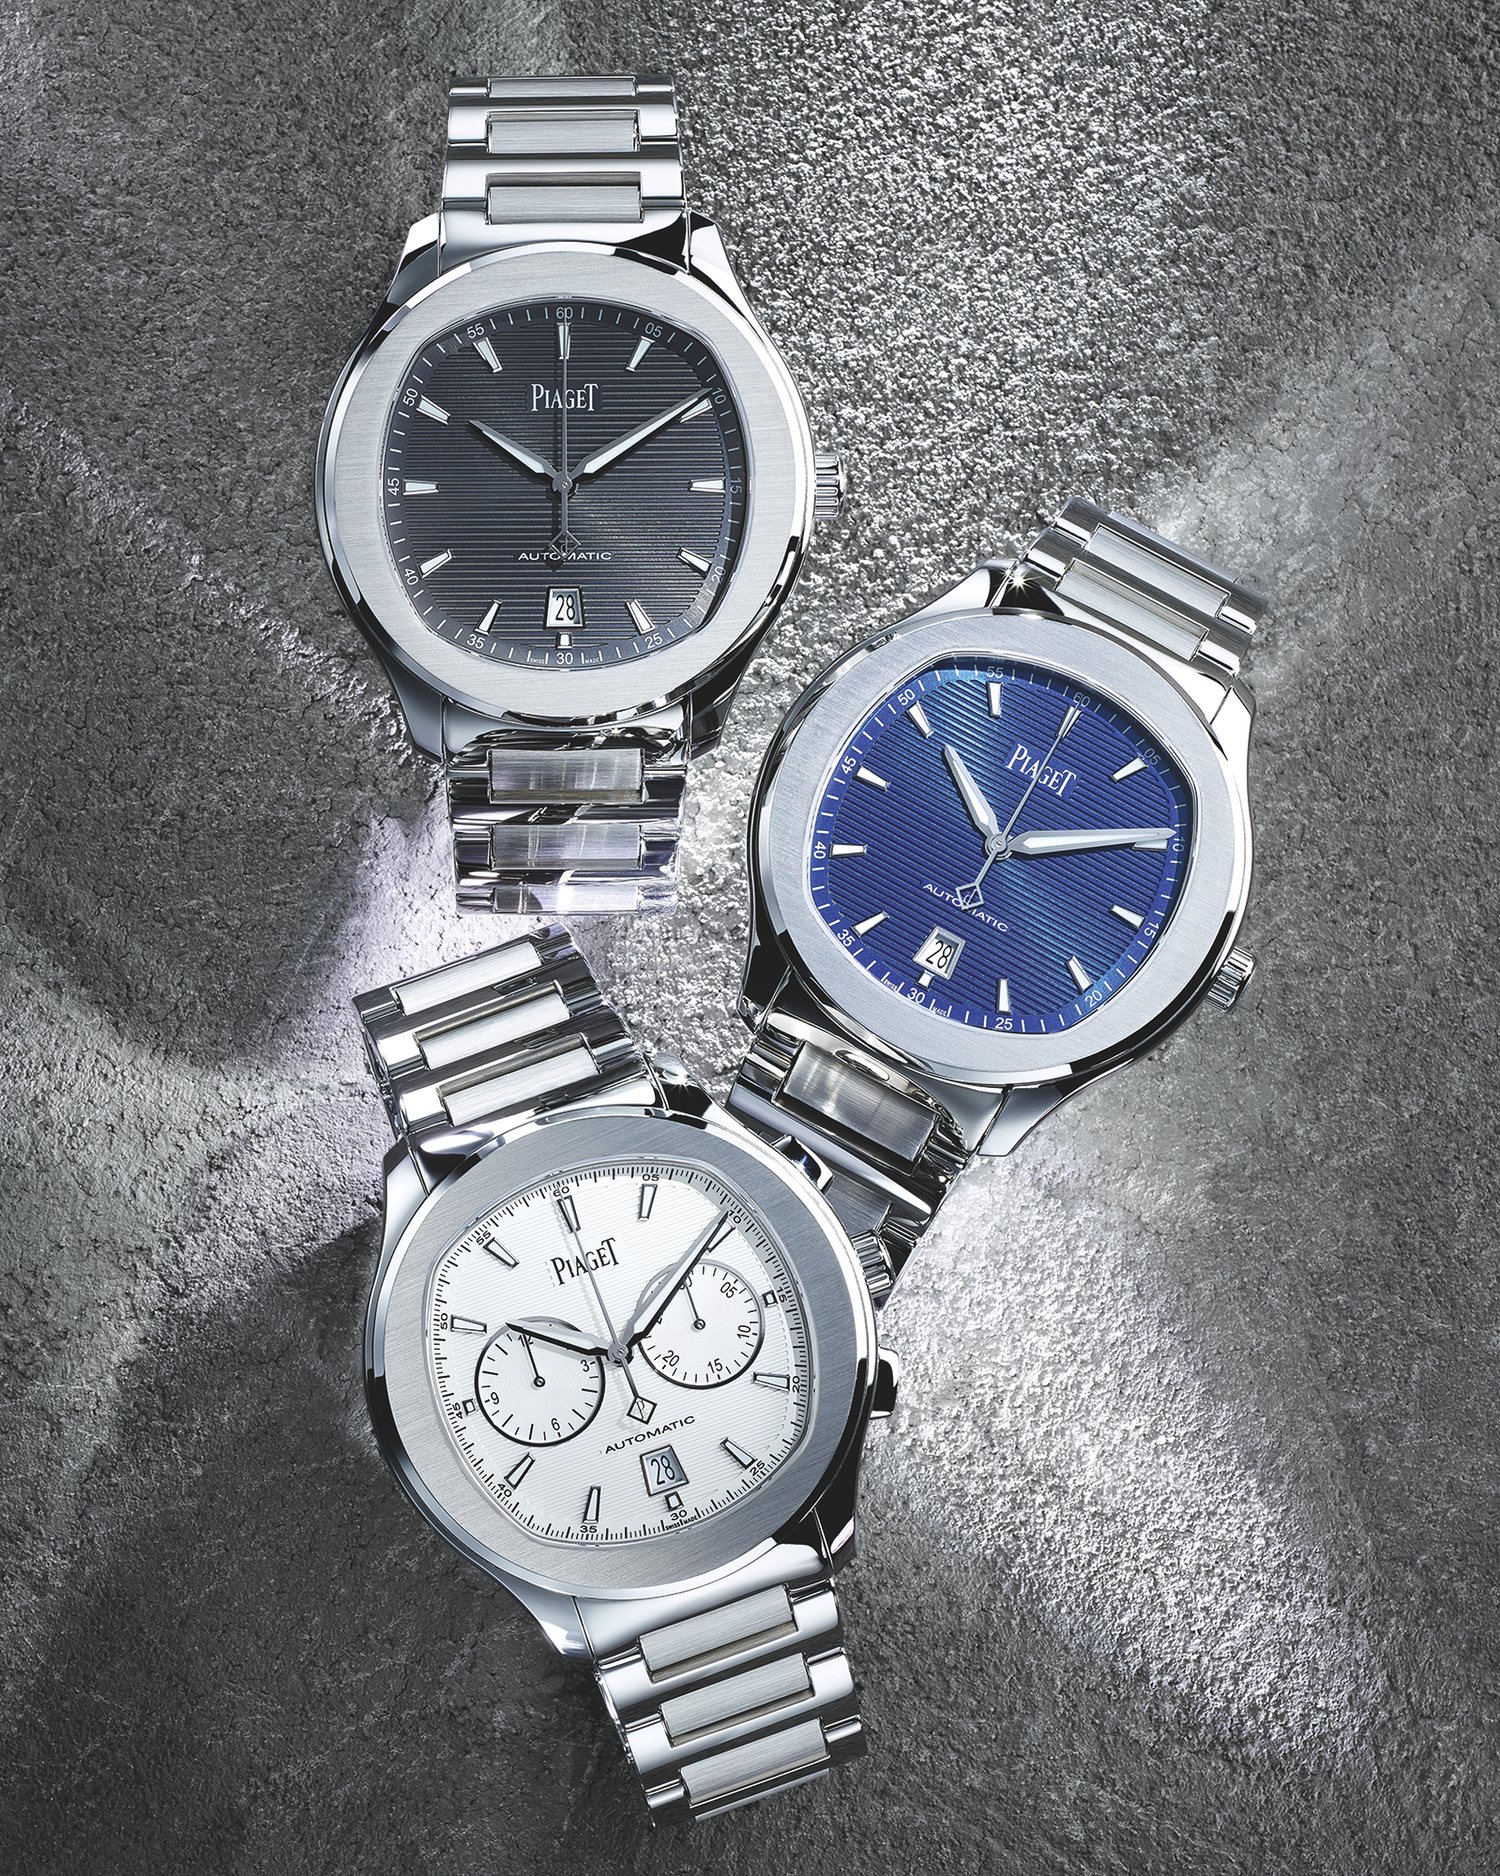 PIAGET POLO S AMBIANCE PICTURE